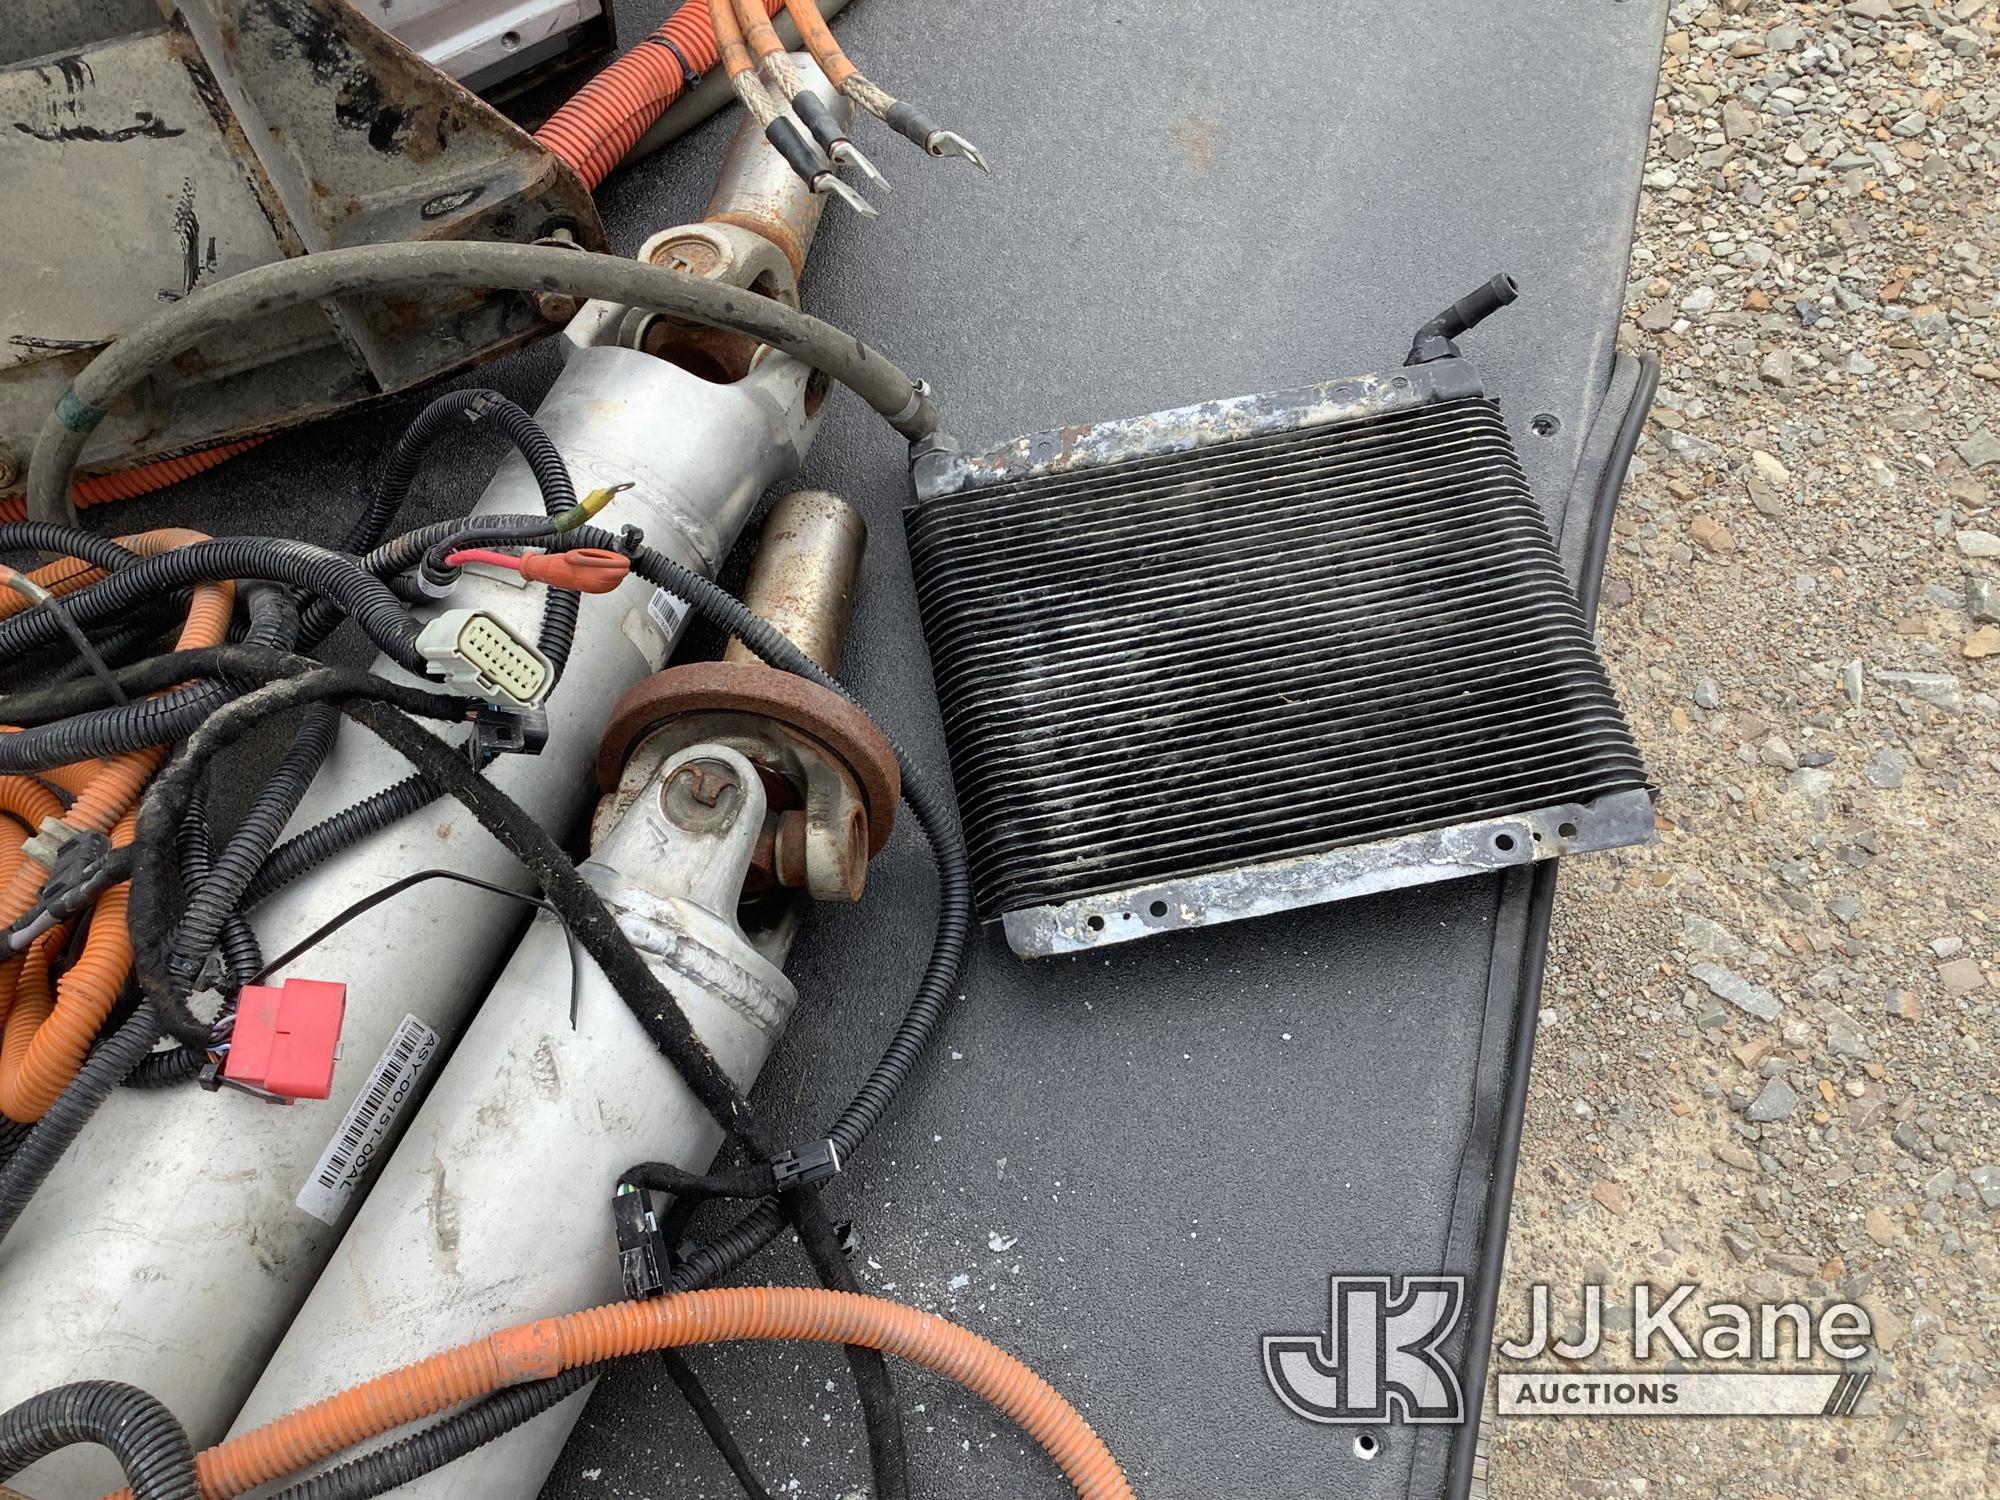 (Smock, PA) 2019 Ford F150 Hybrid Conversion Condition Unknown